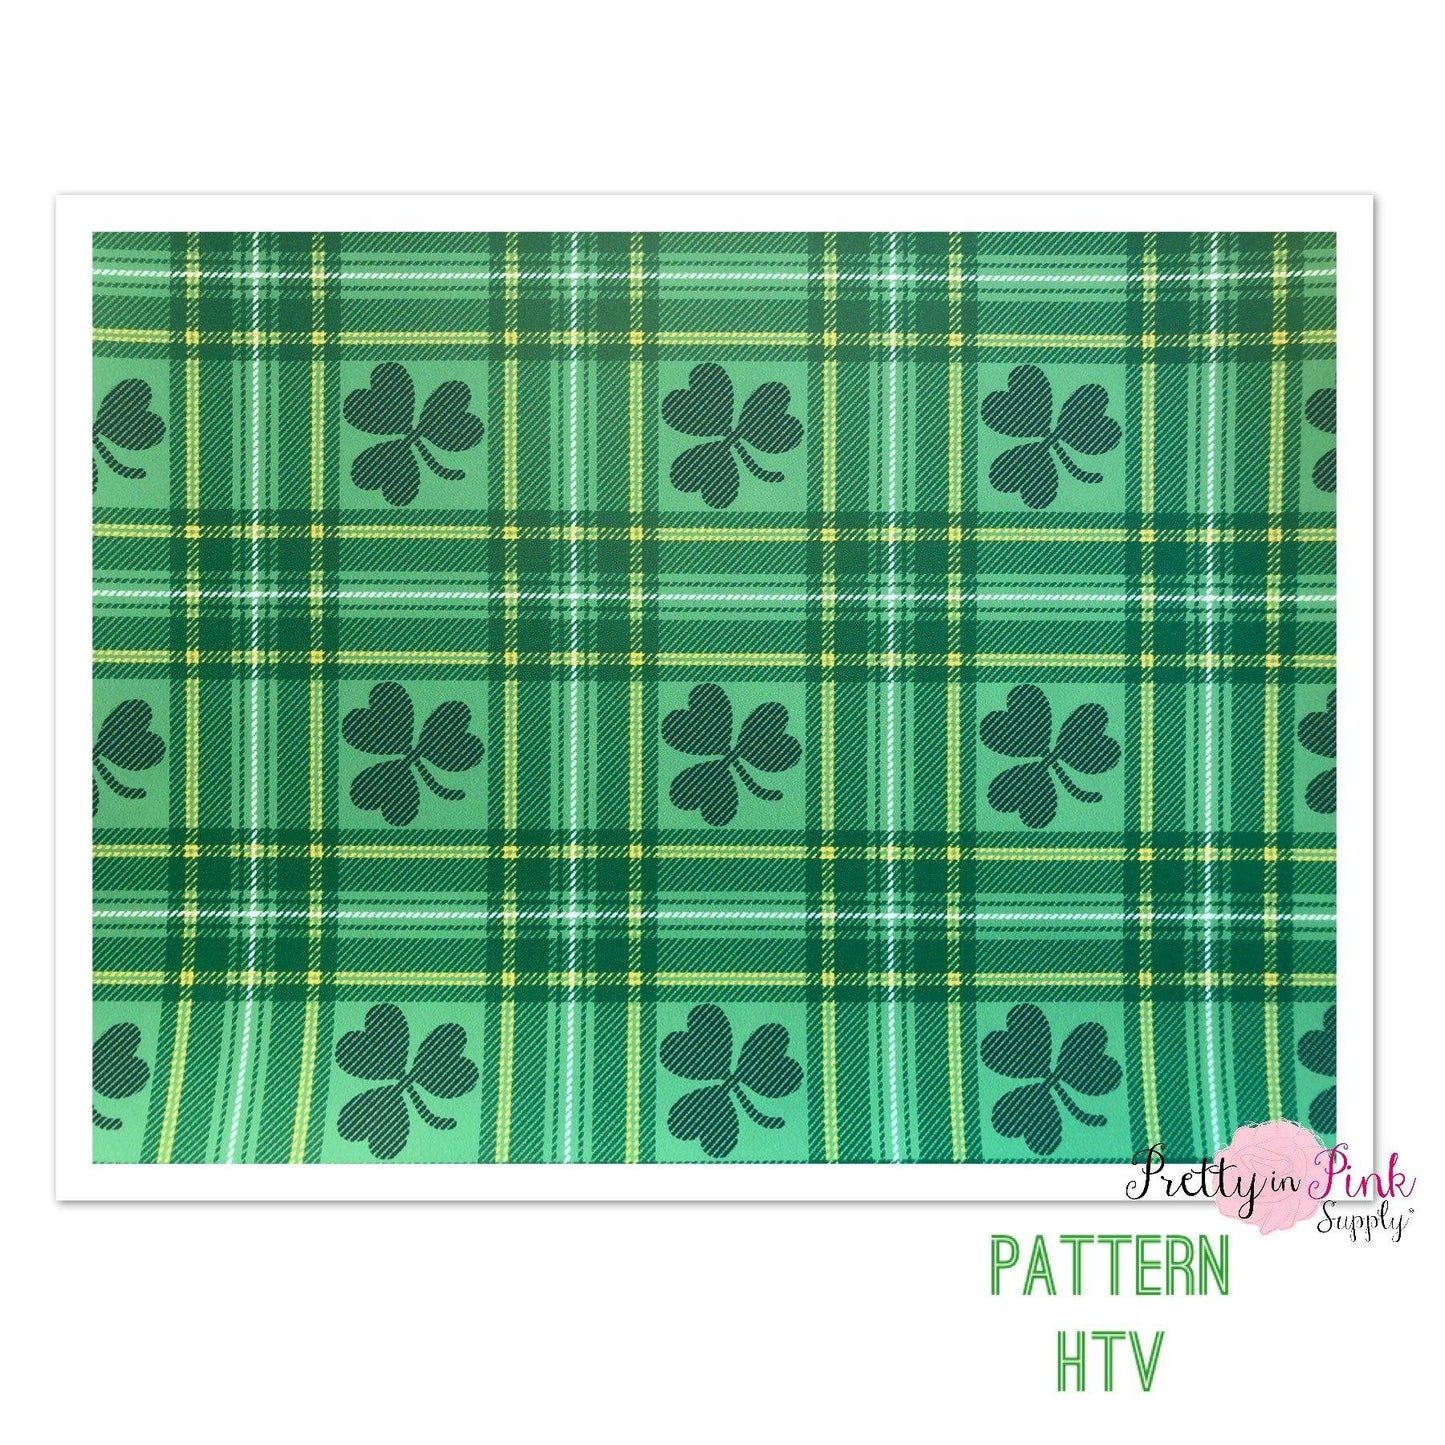 Pattern HTV- St Patrick Plaid - Pretty in Pink Supply